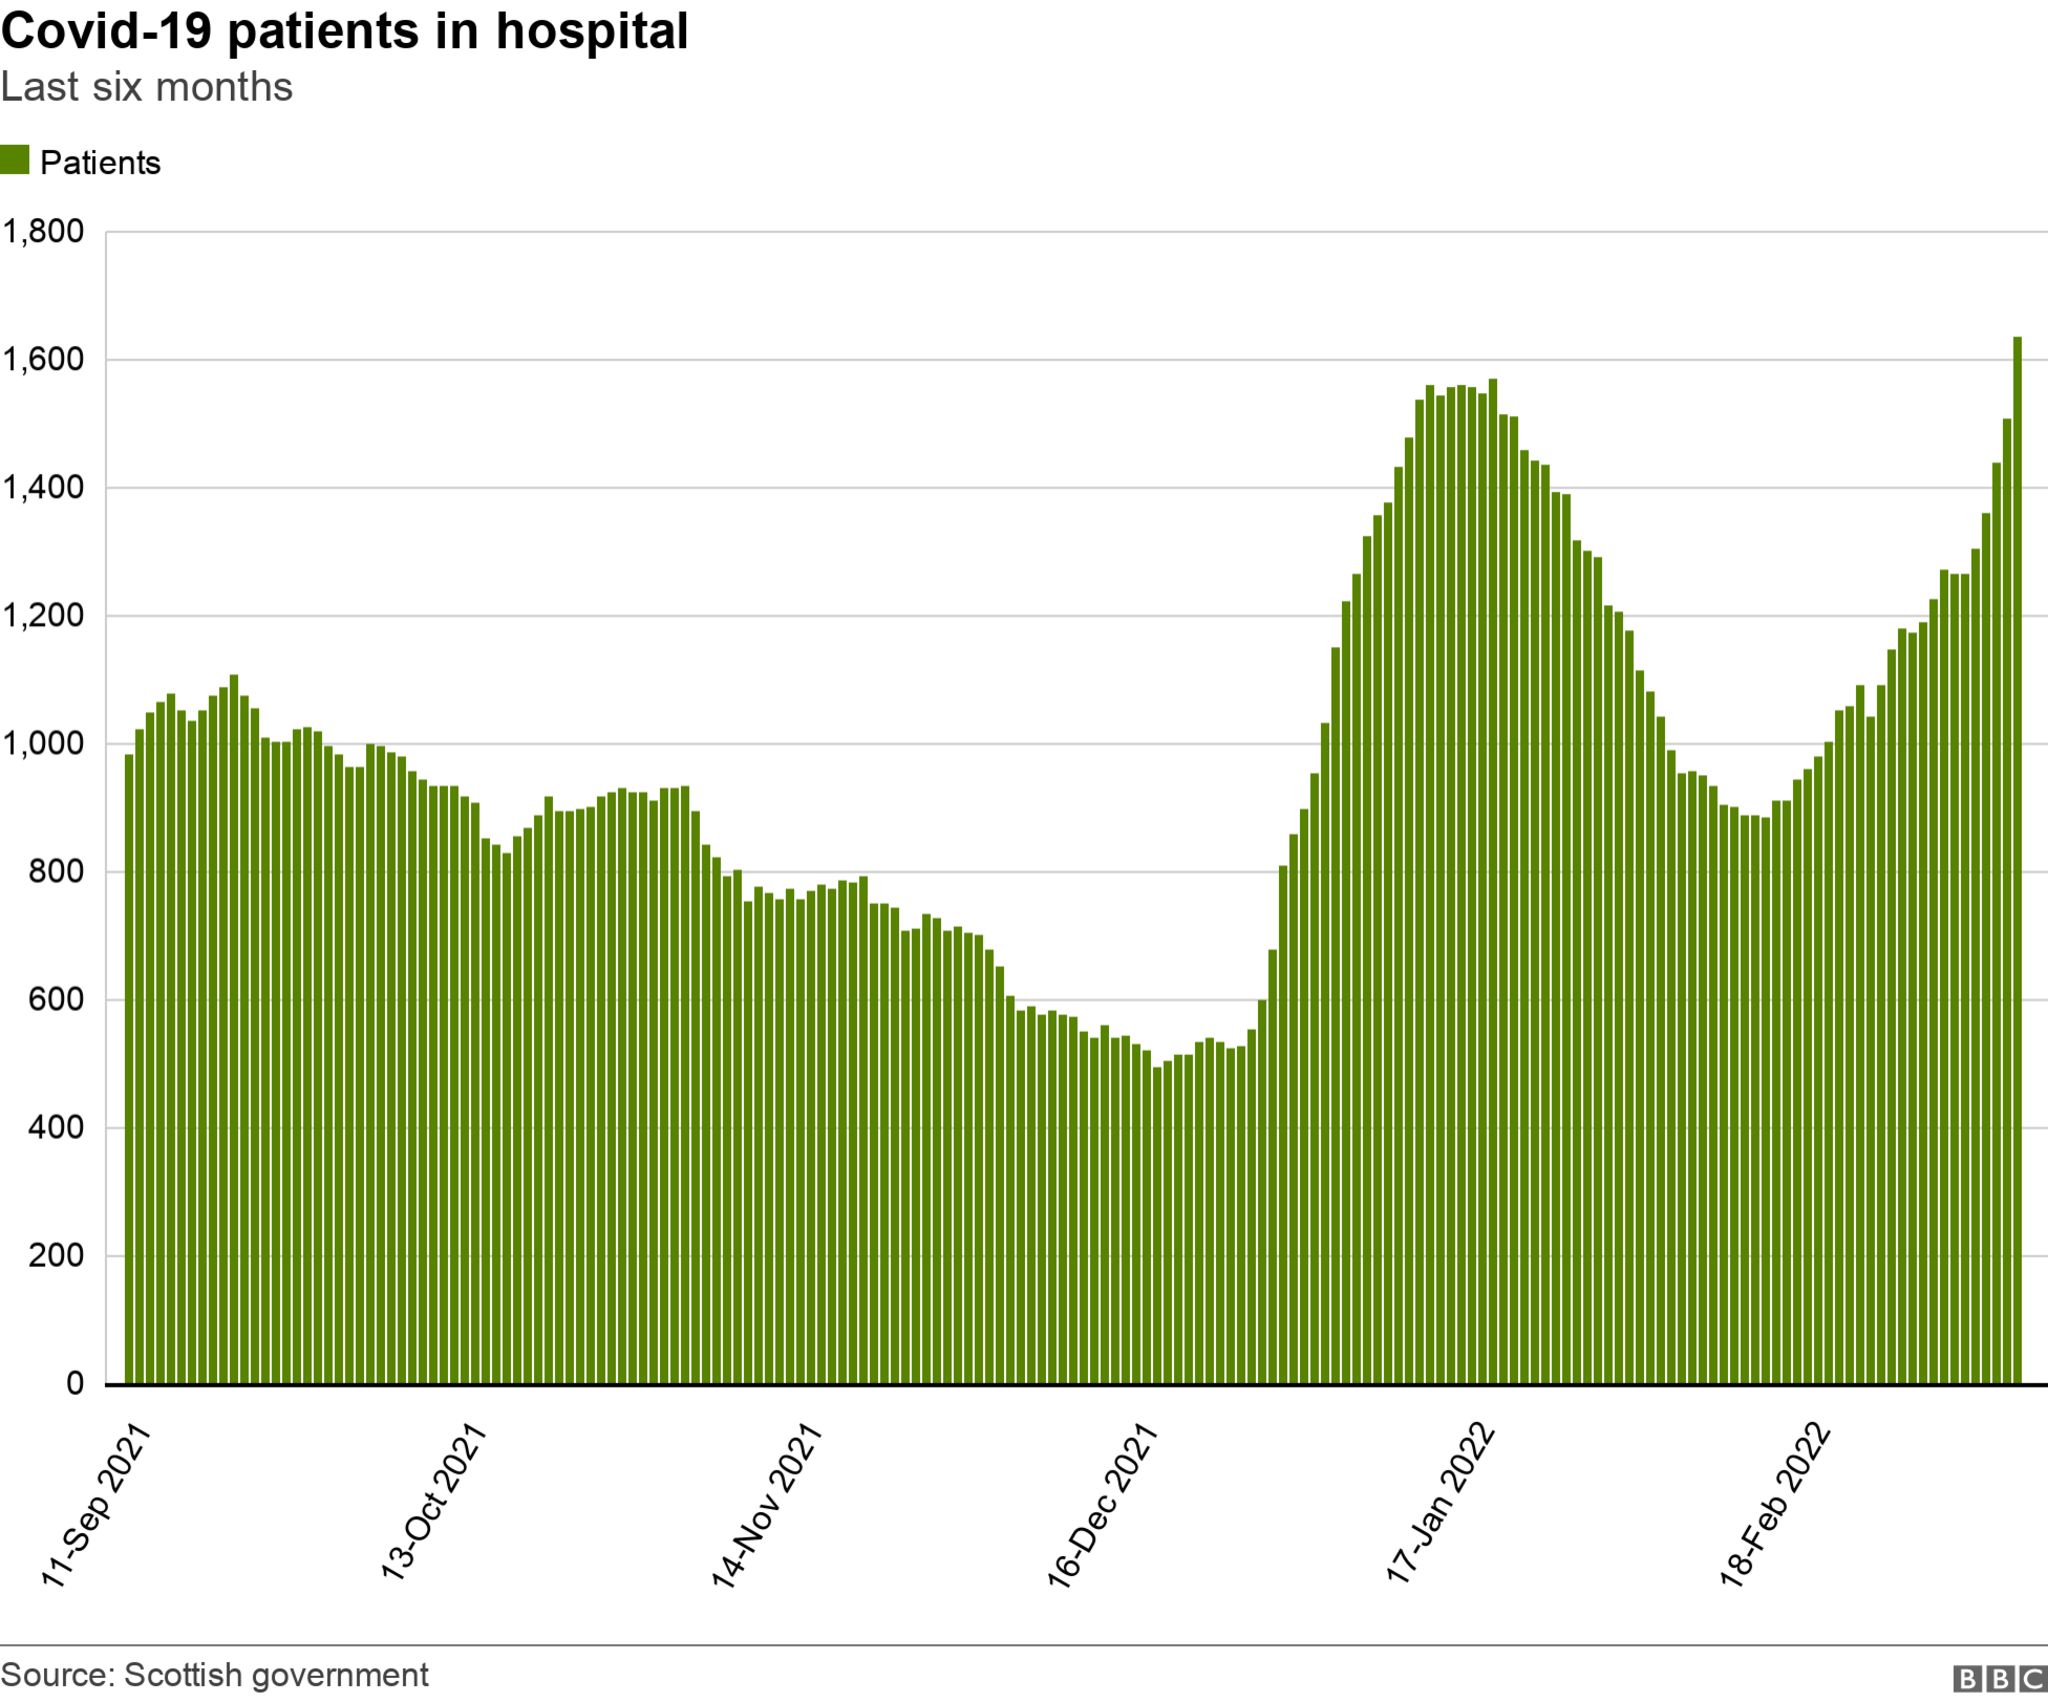 Chart showing the number of patients in Scotland's hospitals over six months, peaking on 10 March